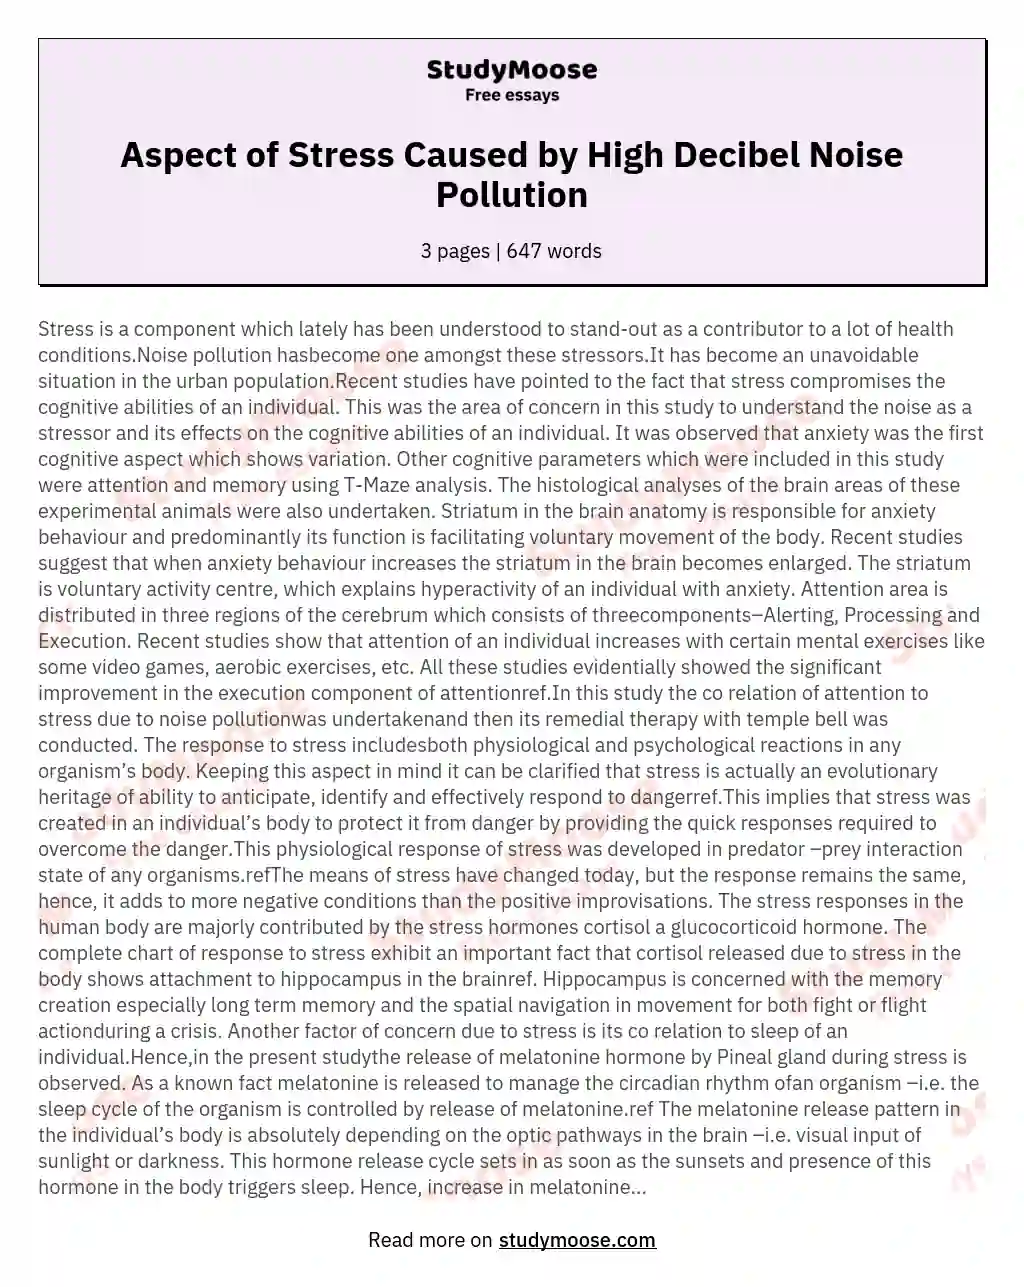 Aspect of Stress Caused by High Decibel Noise Pollution essay